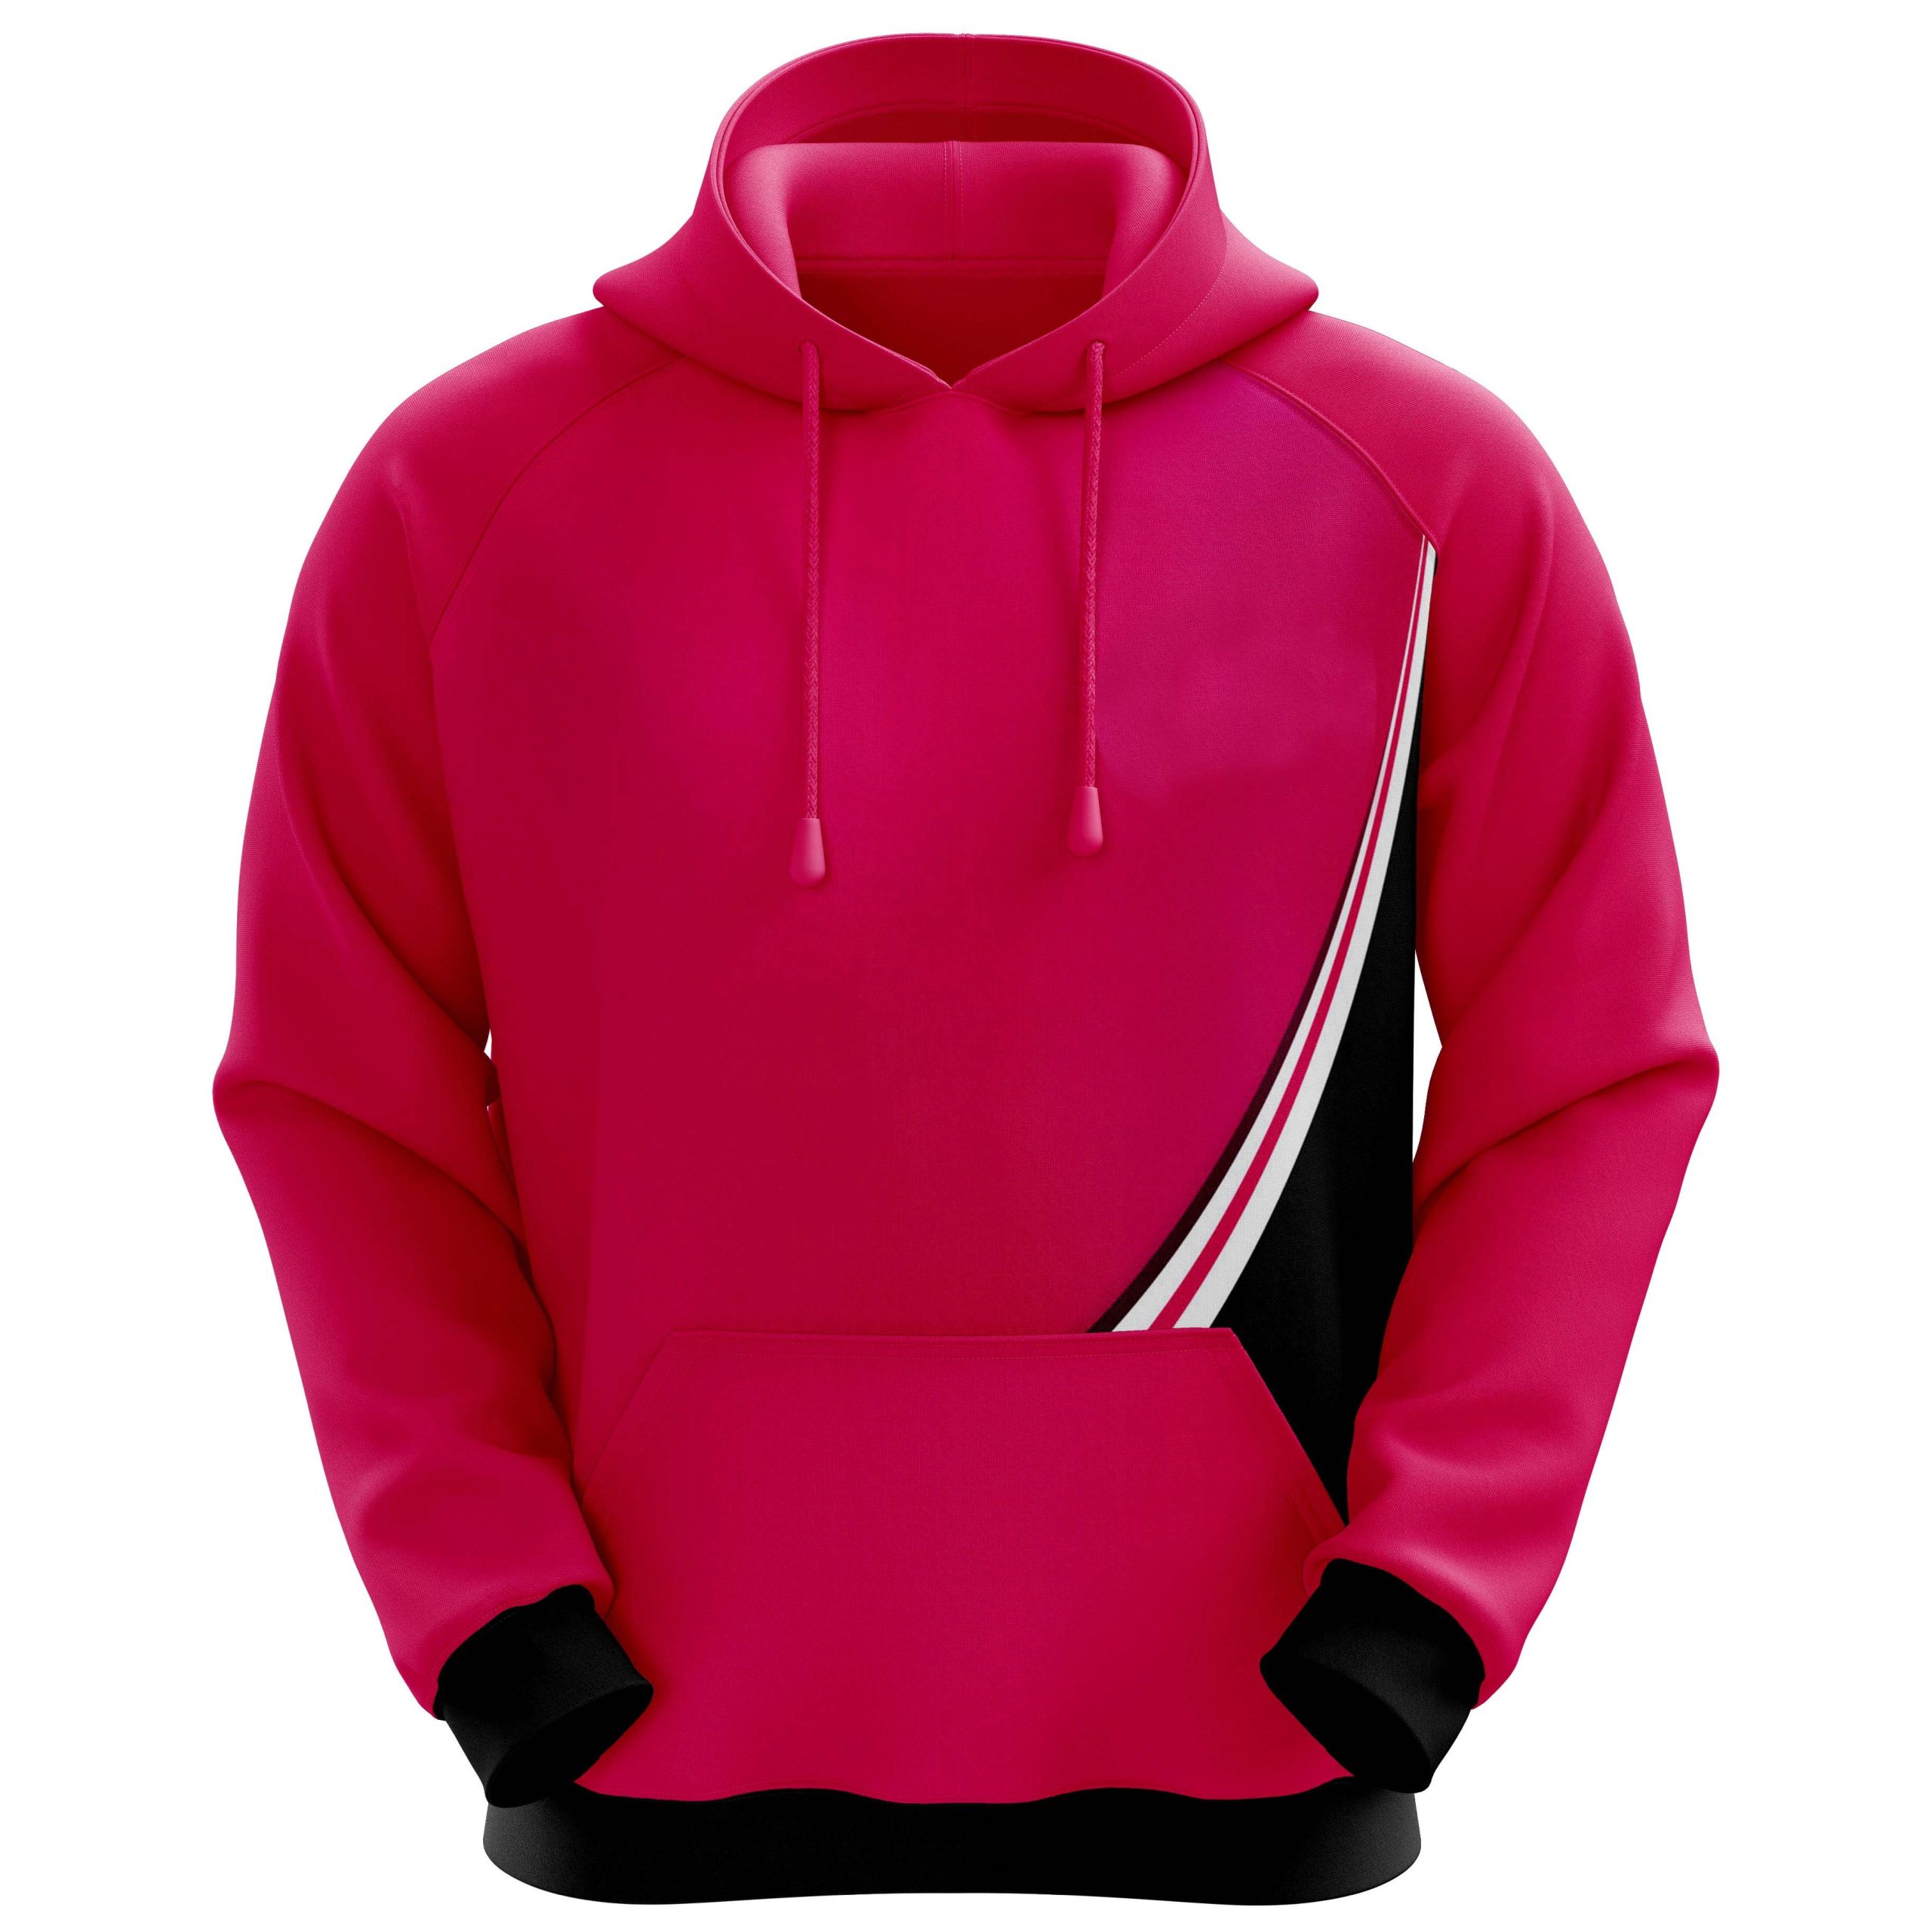 Dye Sublimation Hoodies